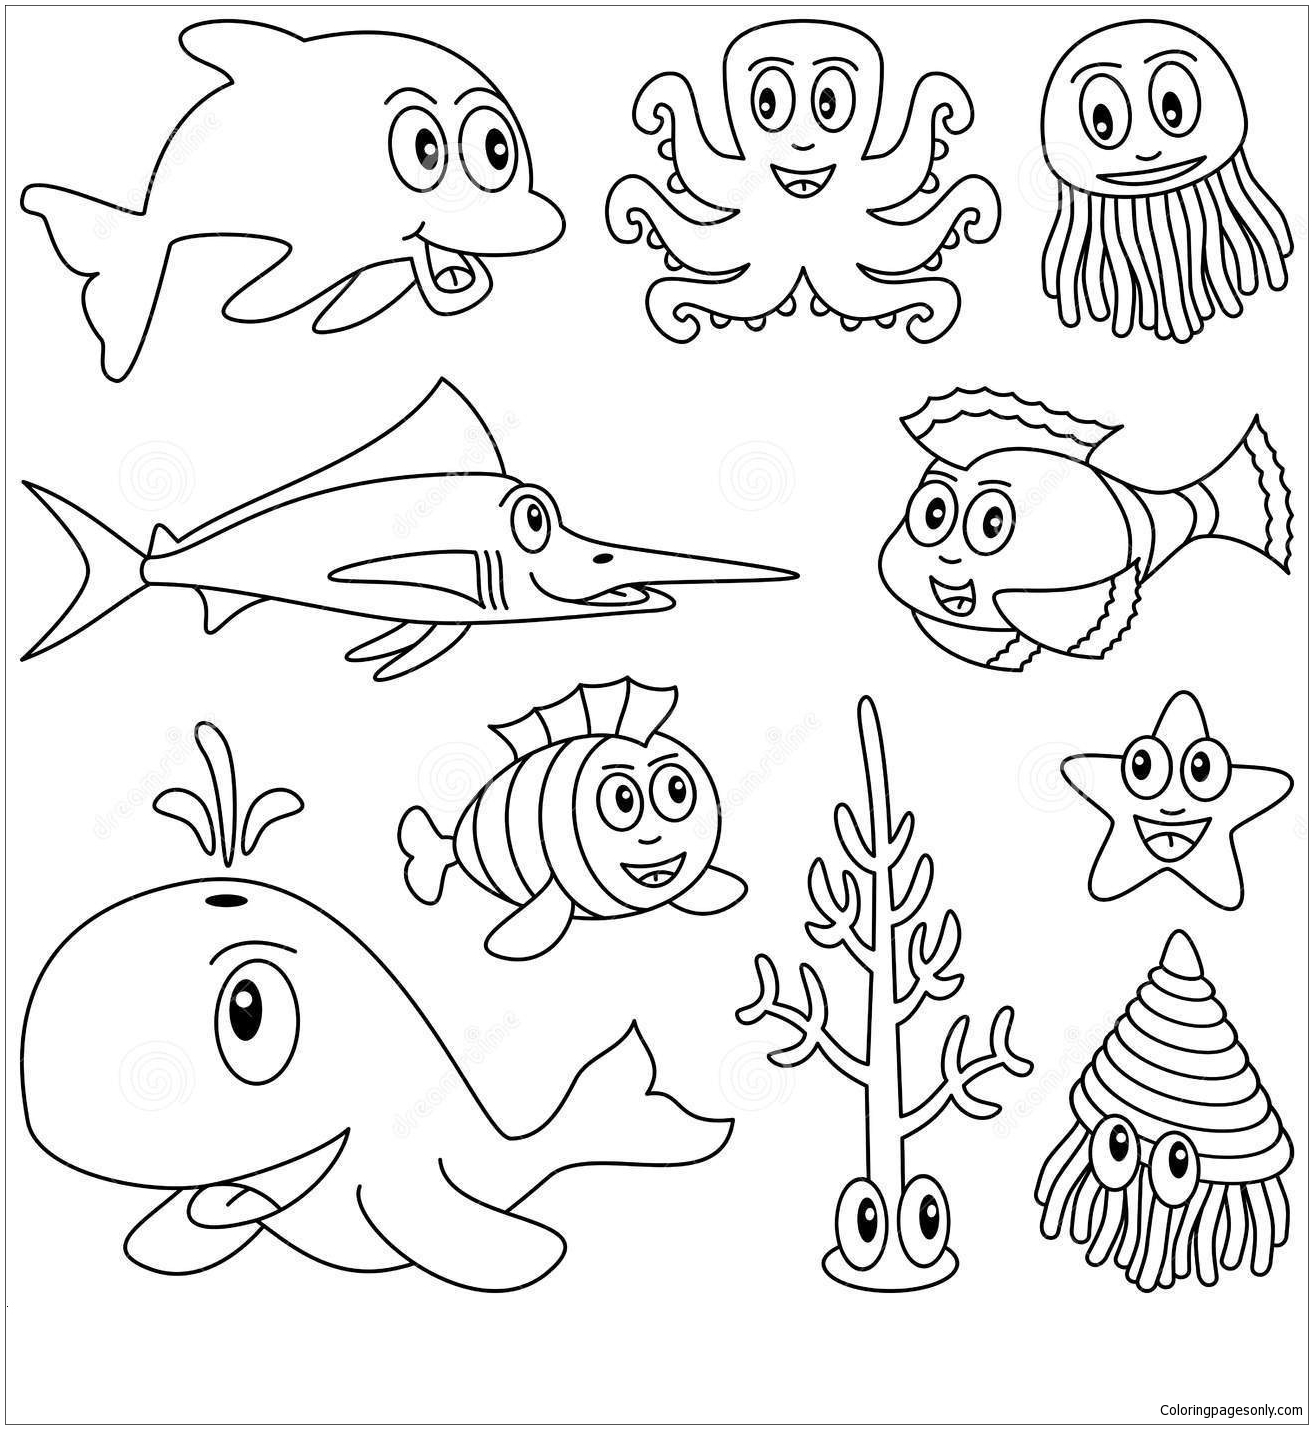 printable-pictures-of-ocean-animals-printable-word-searches